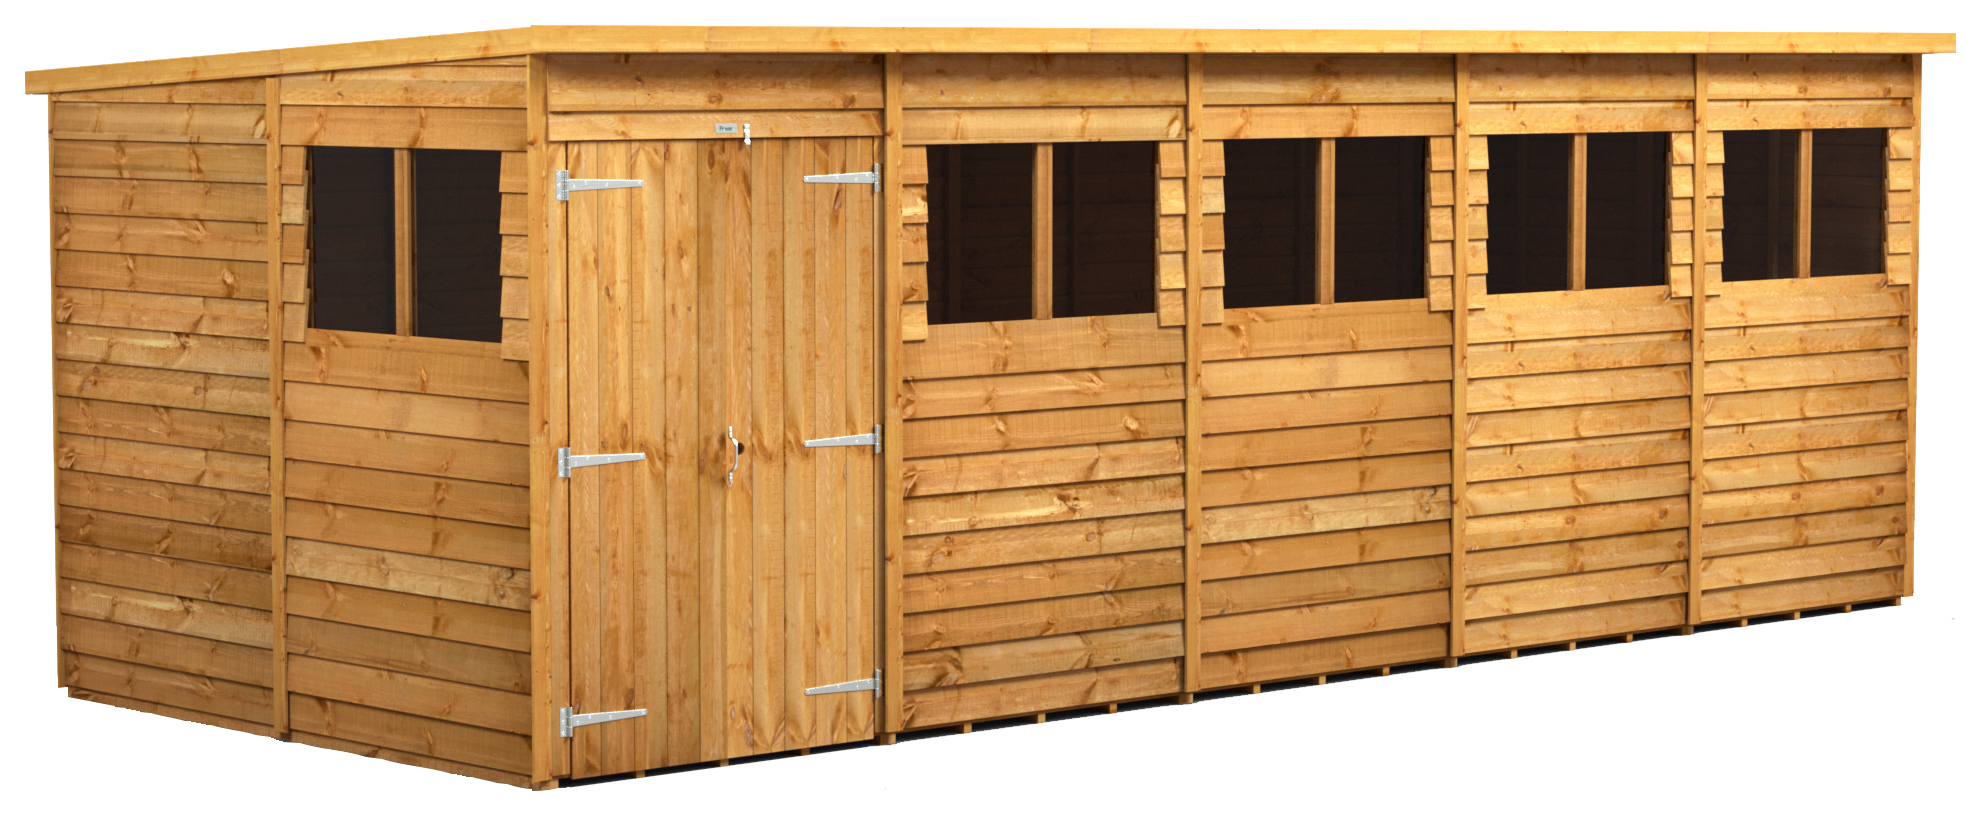 Power Sheds Double Door Pent Overlap Dip Treated Shed - 20 x 8ft